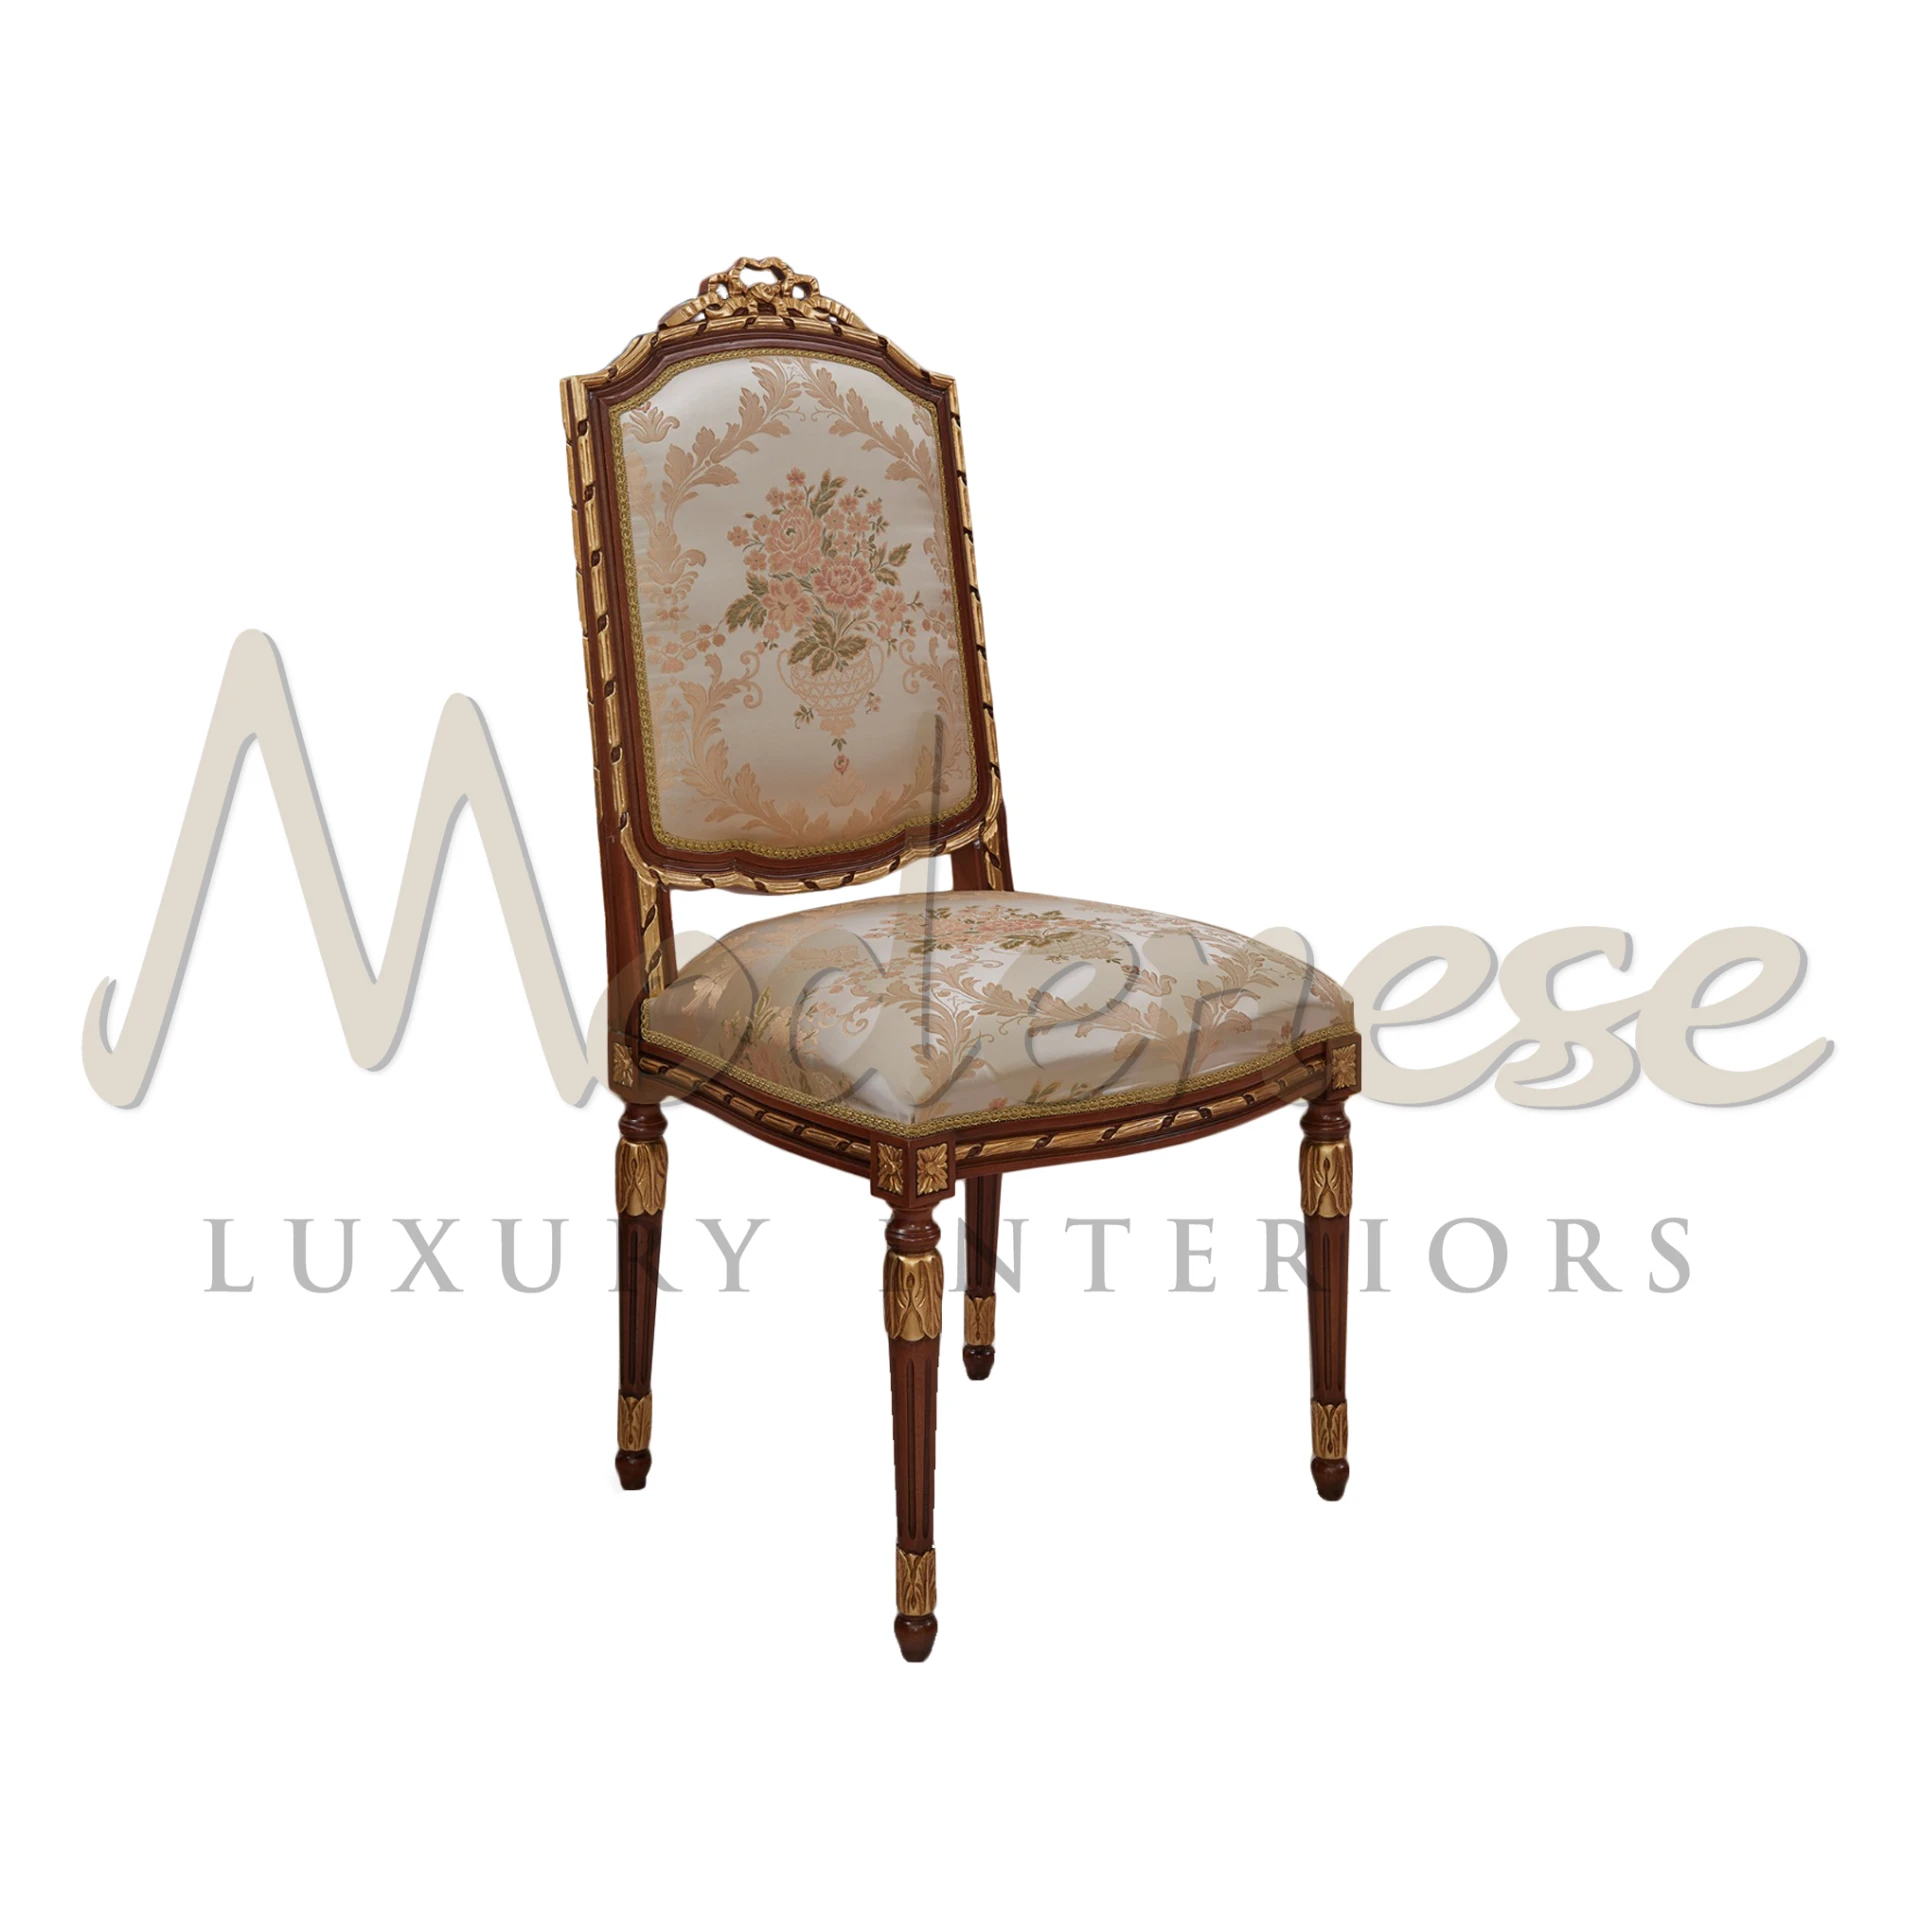 Discover the beauty of Modenese imperial chair. With an artfully sculpted silhouette, this chair is a testament to graceful design and refined aesthetics.

